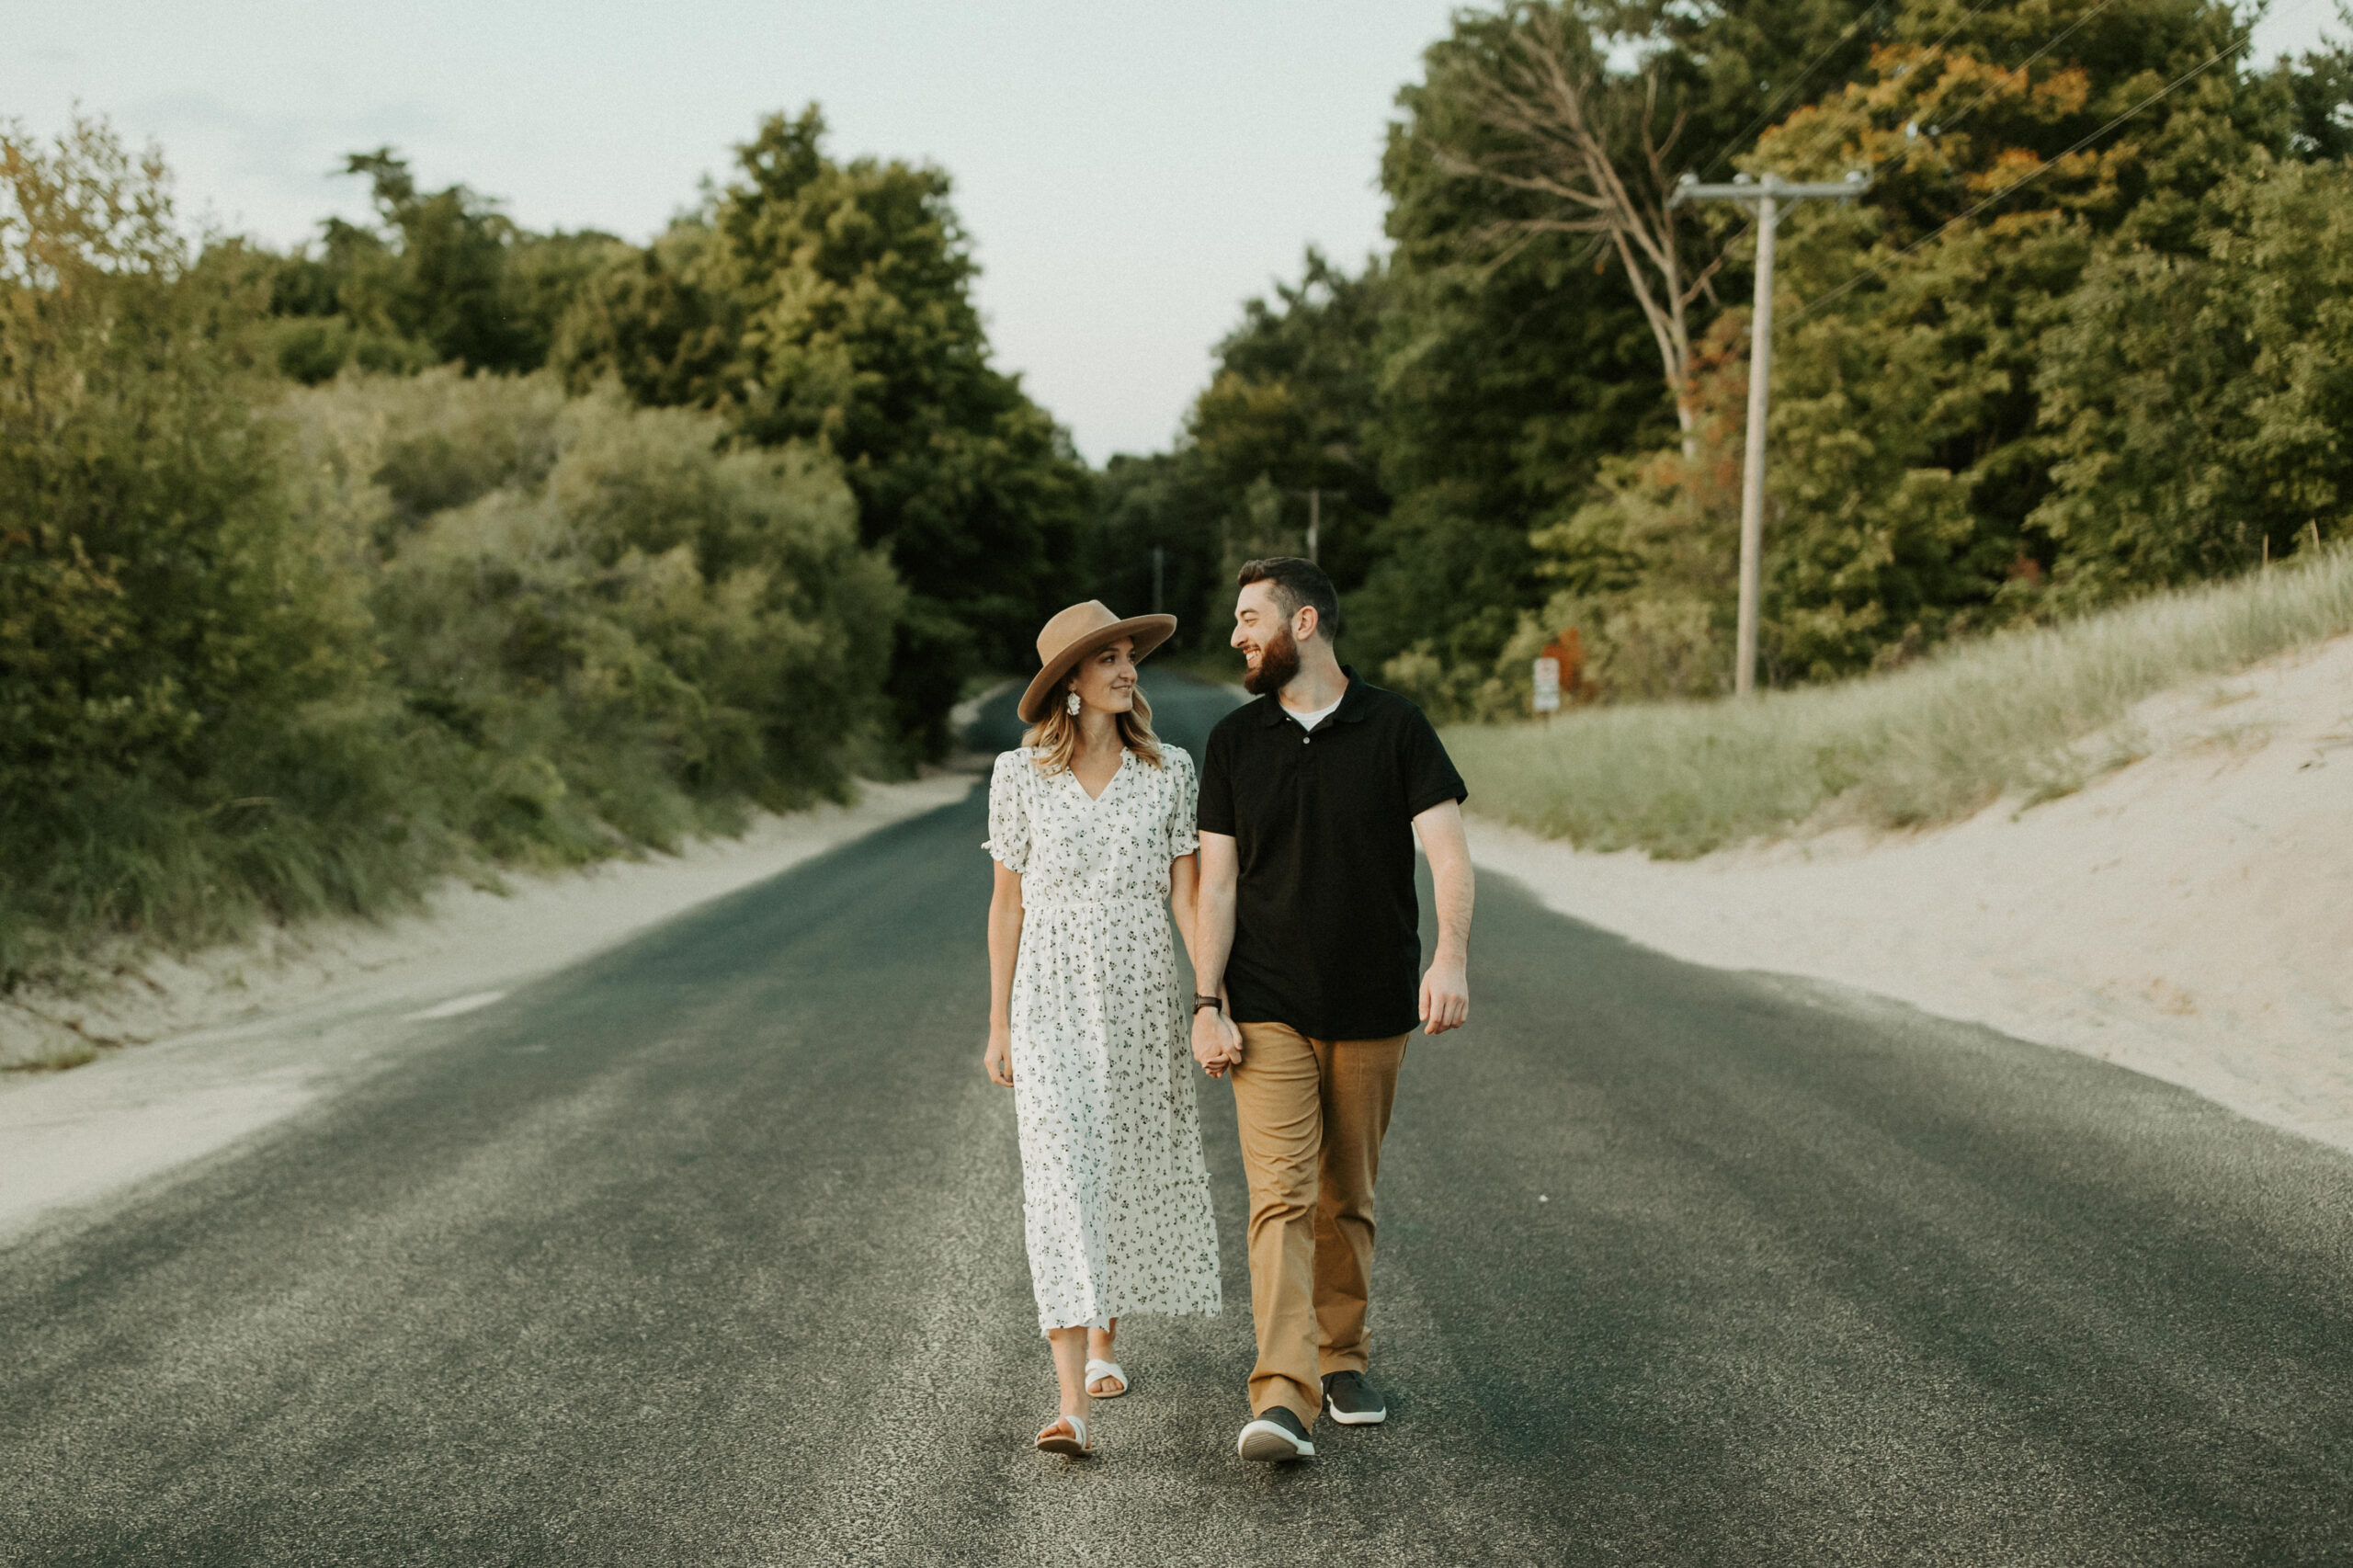 Tips for authentic engagement photos